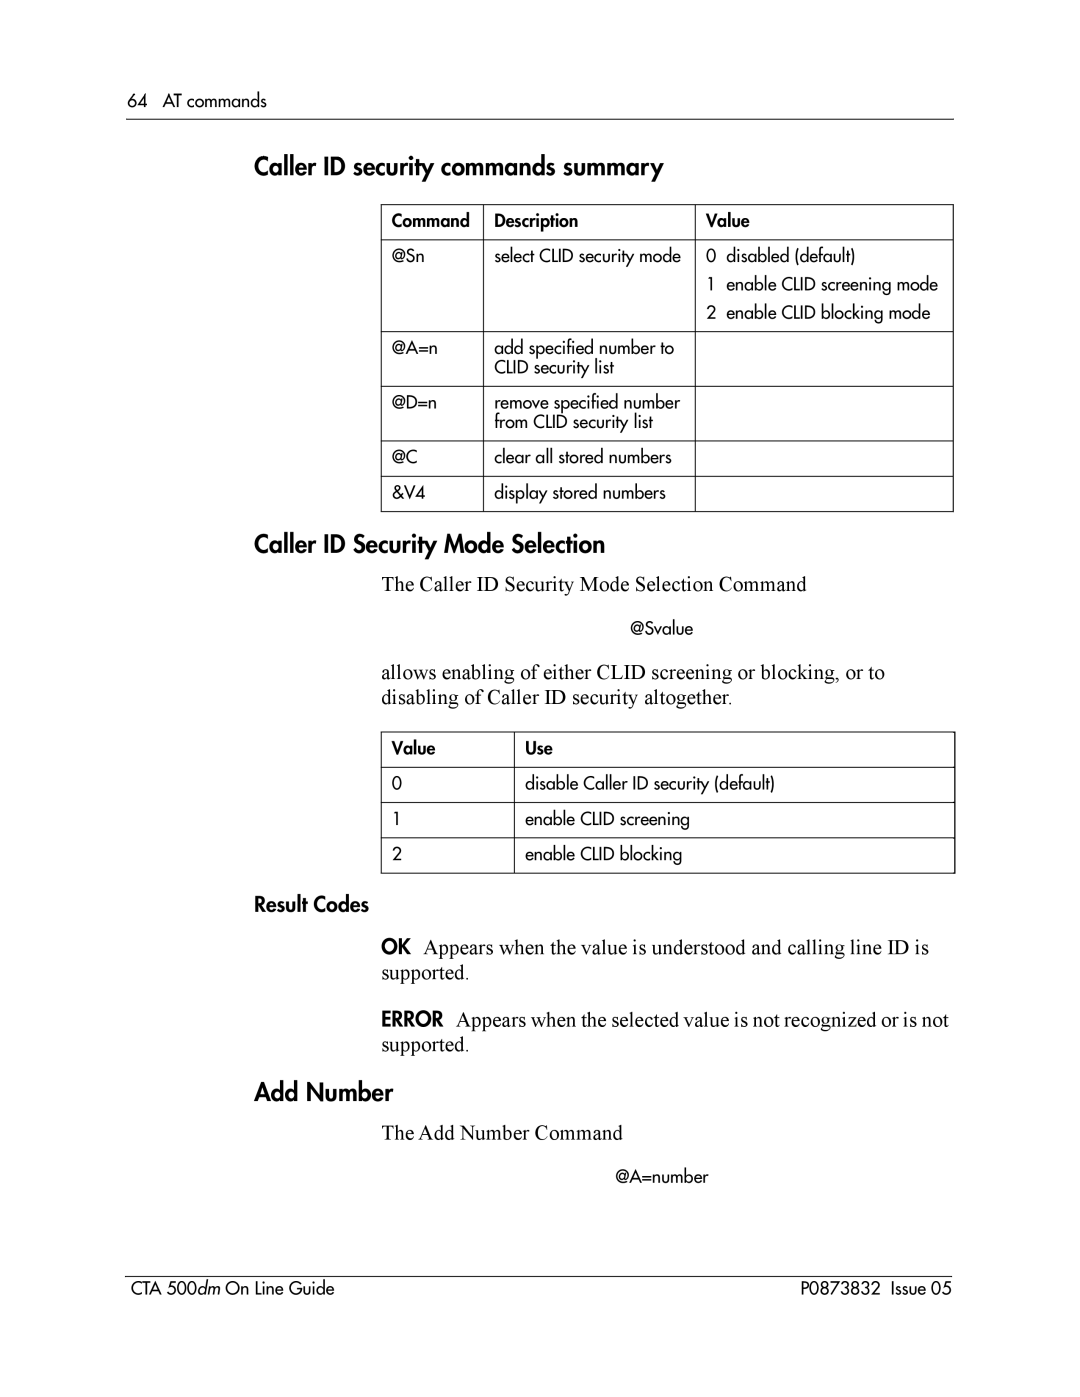 Nortel Networks CTA 500dm manual Caller ID security commands summary, Caller ID Security Mode Selection, Add Number 